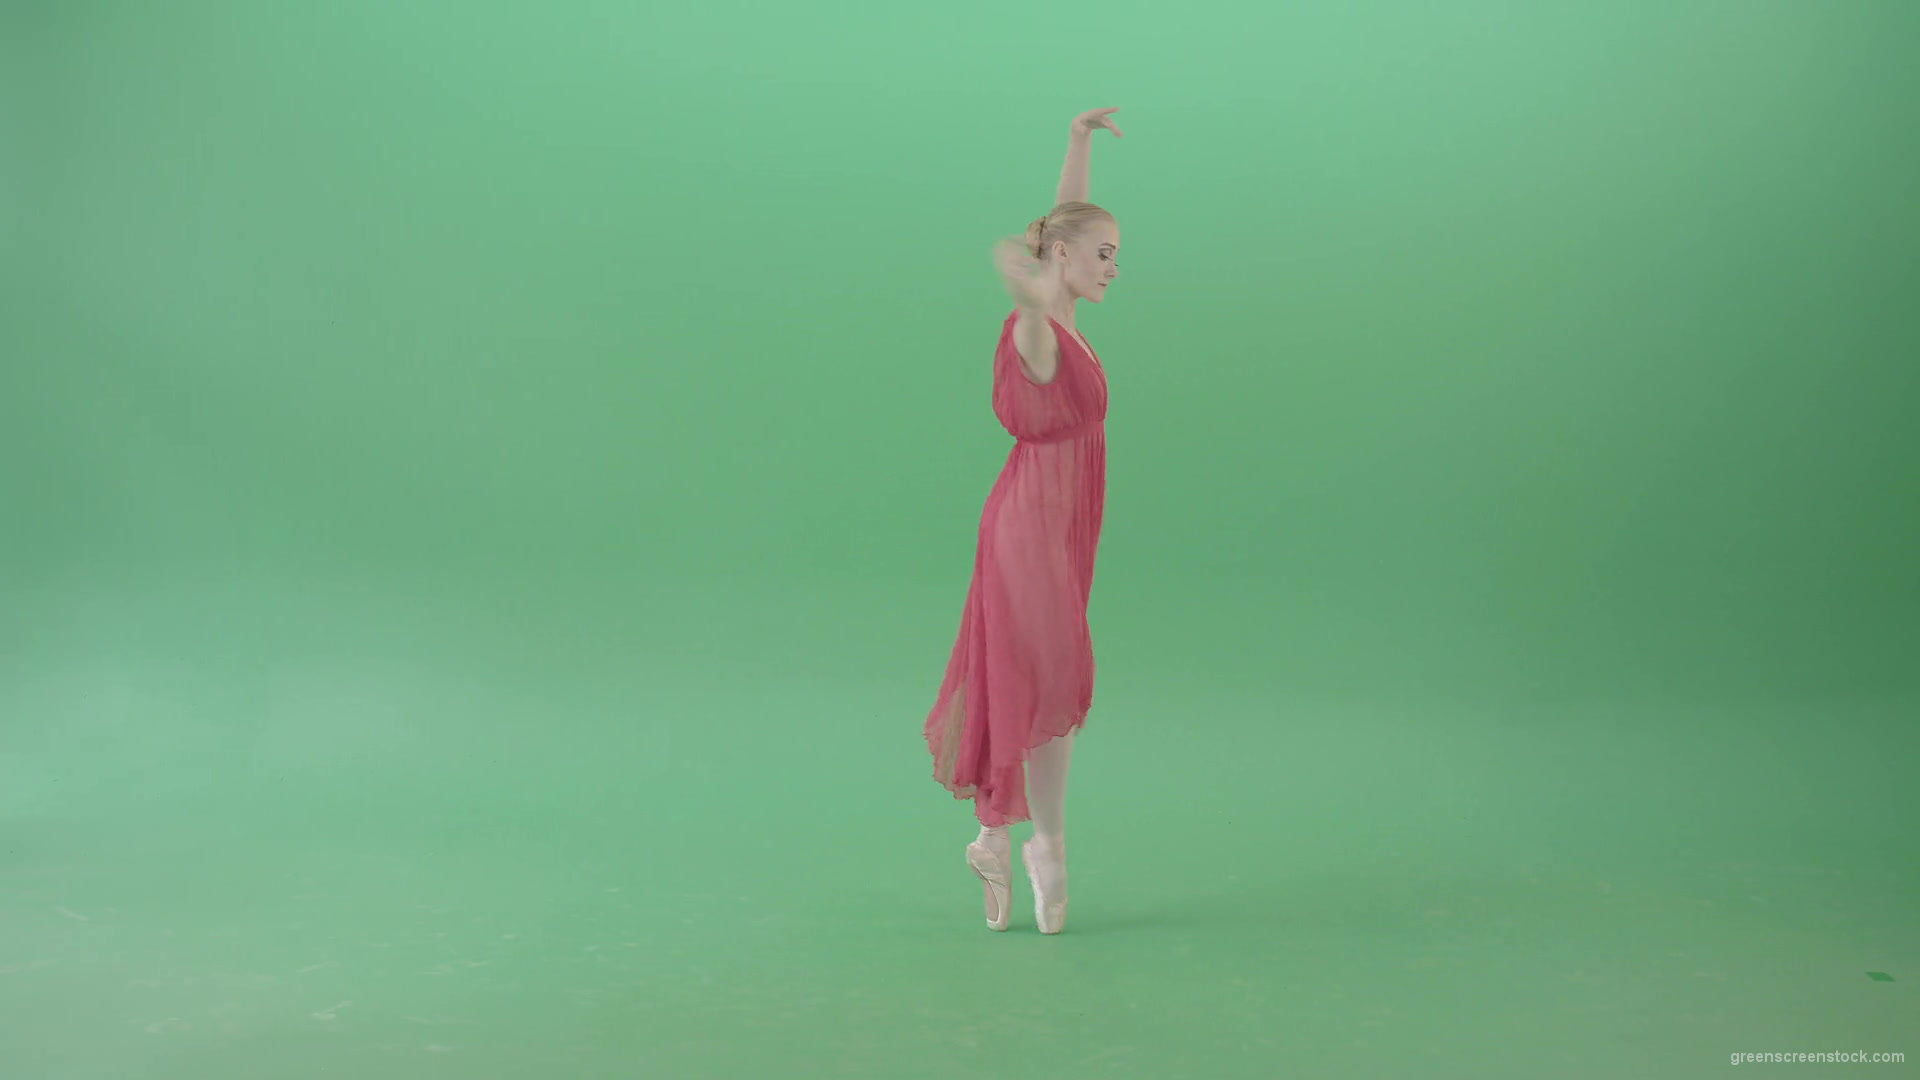 Blonde-girl-in-red-dress-dancing-classical-ballet-on-green-screen-4K-video-footage-1920_004 Green Screen Stock